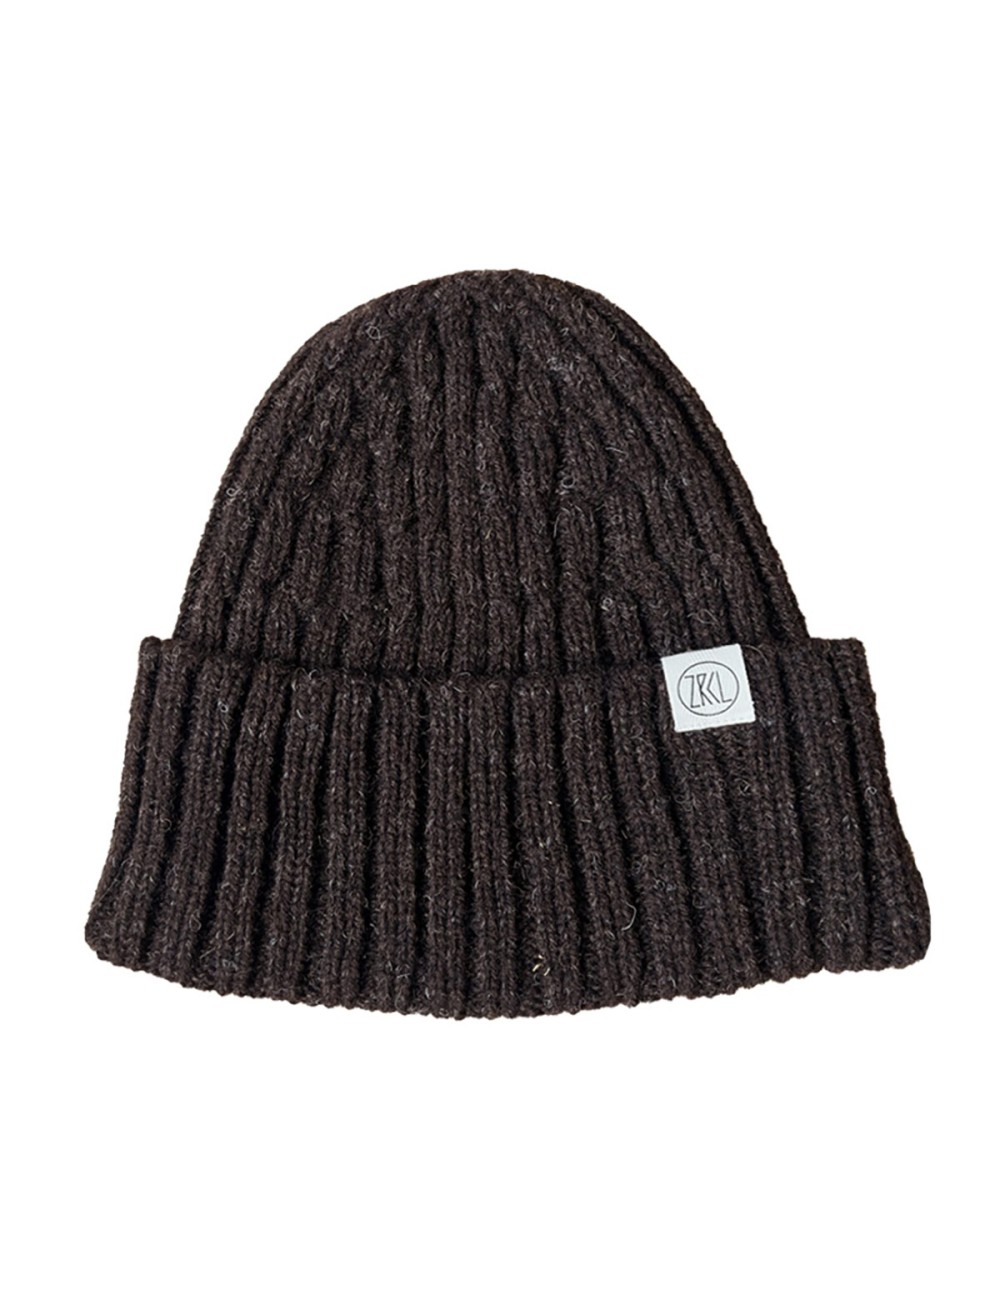 ZRCL A Beanie Sheep Wooly - Brown